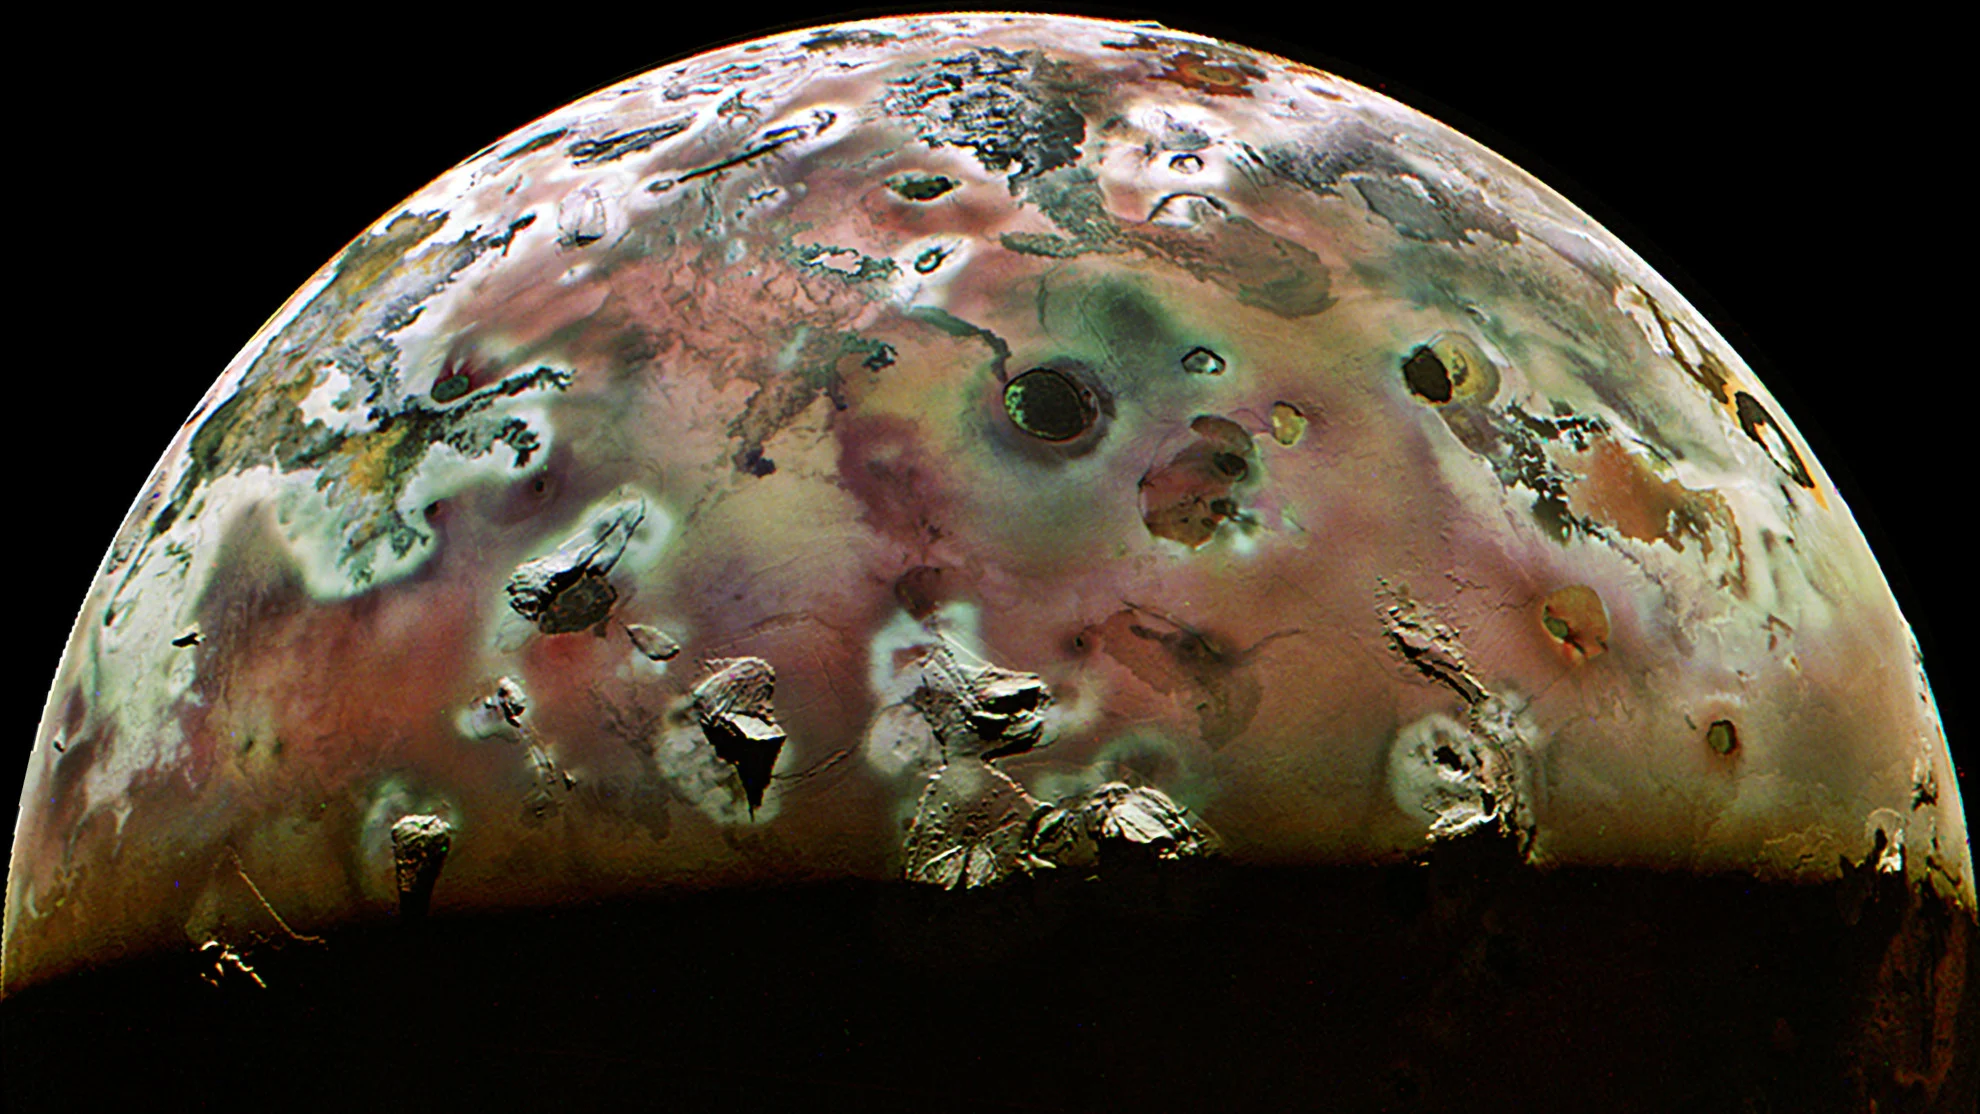 Volcanic Io imaged in spectacular detail by NASA's Juno probe